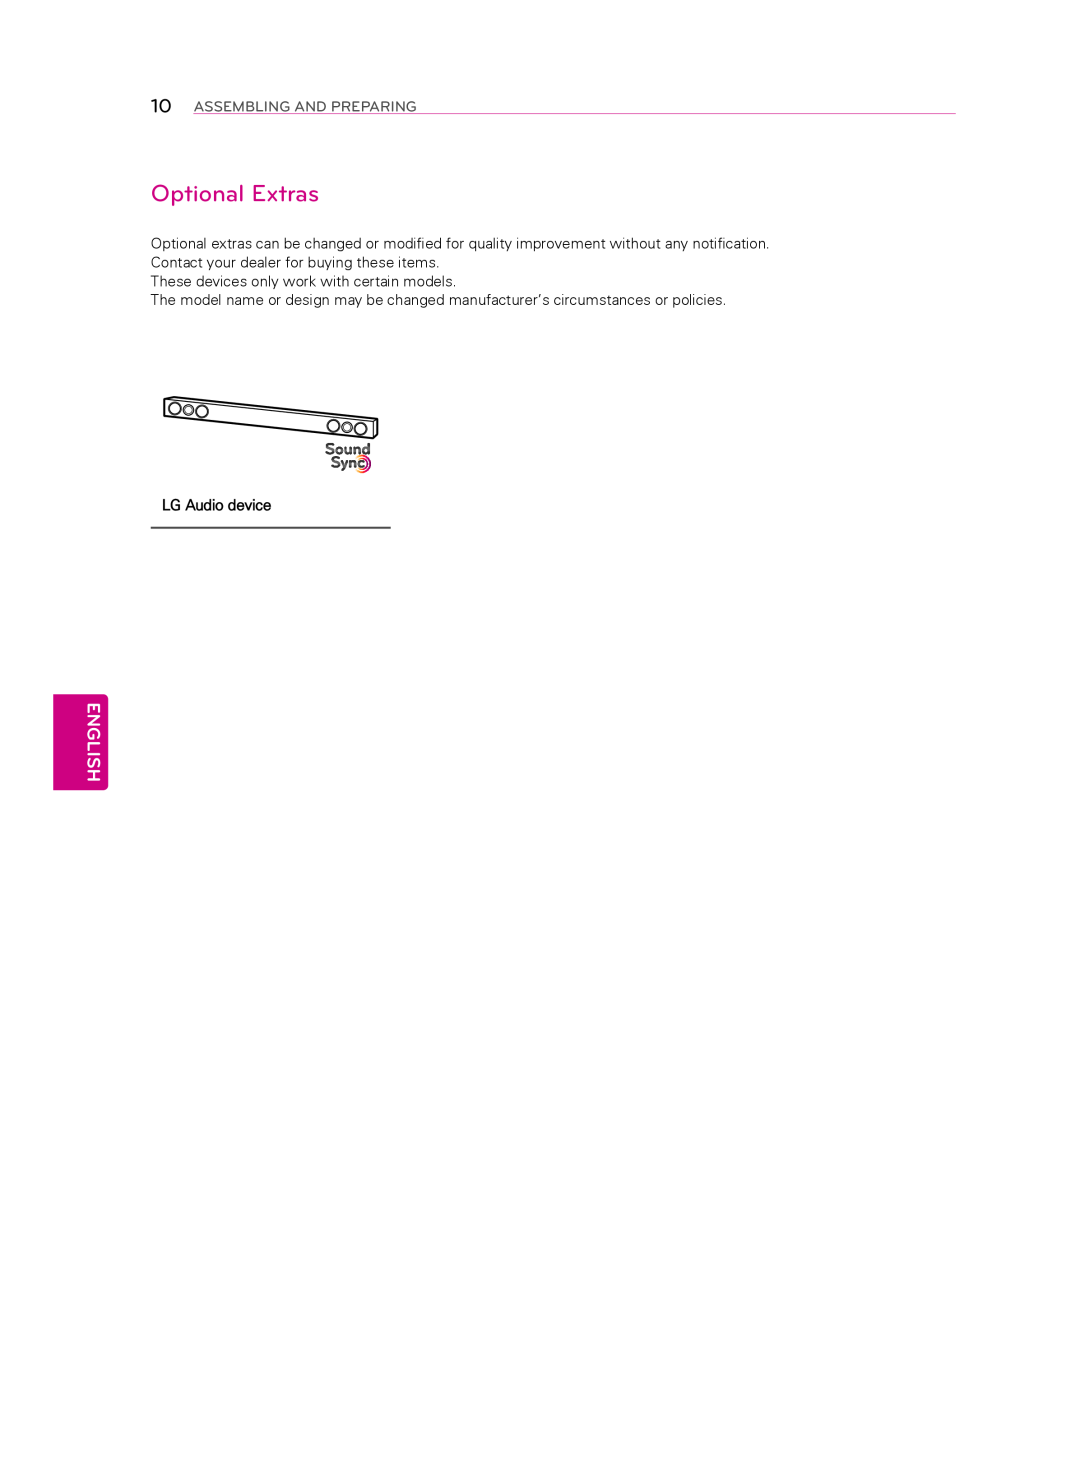 LG Electronics 60LN5400 owner manual Optional Extras, English, Assembling And Preparing, LG Audio device 